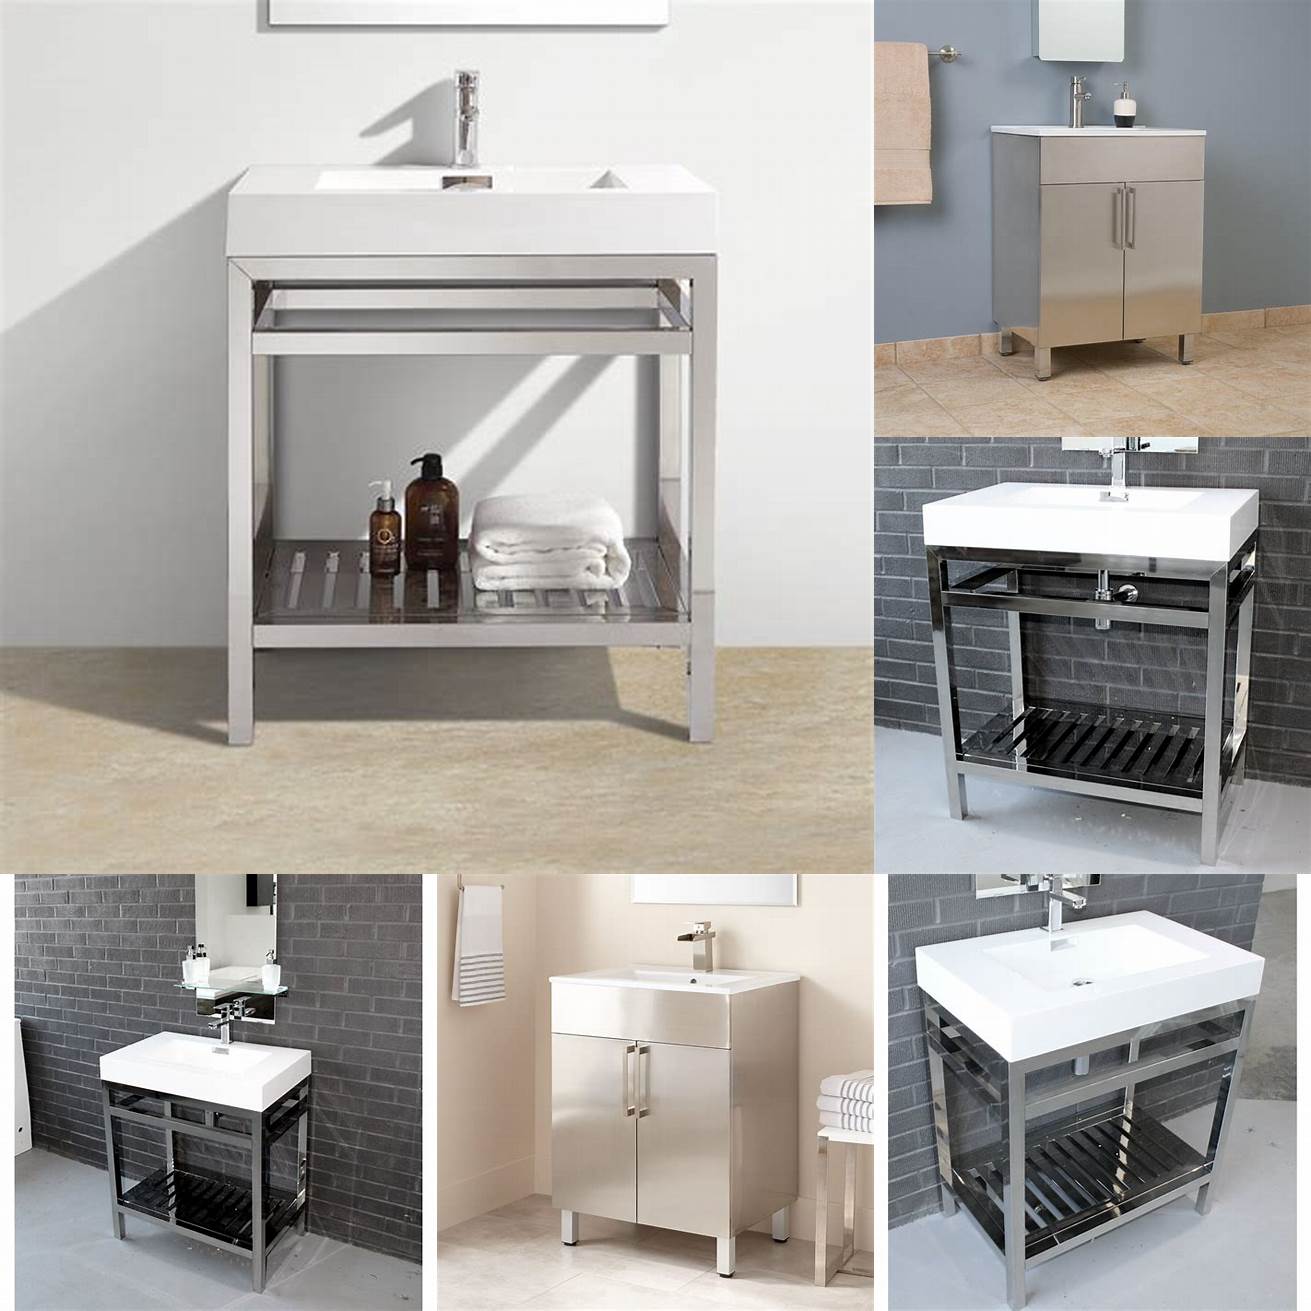 A stainless steel bathroom vanity base is sleek and modern ideal for contemporary bathroom designs